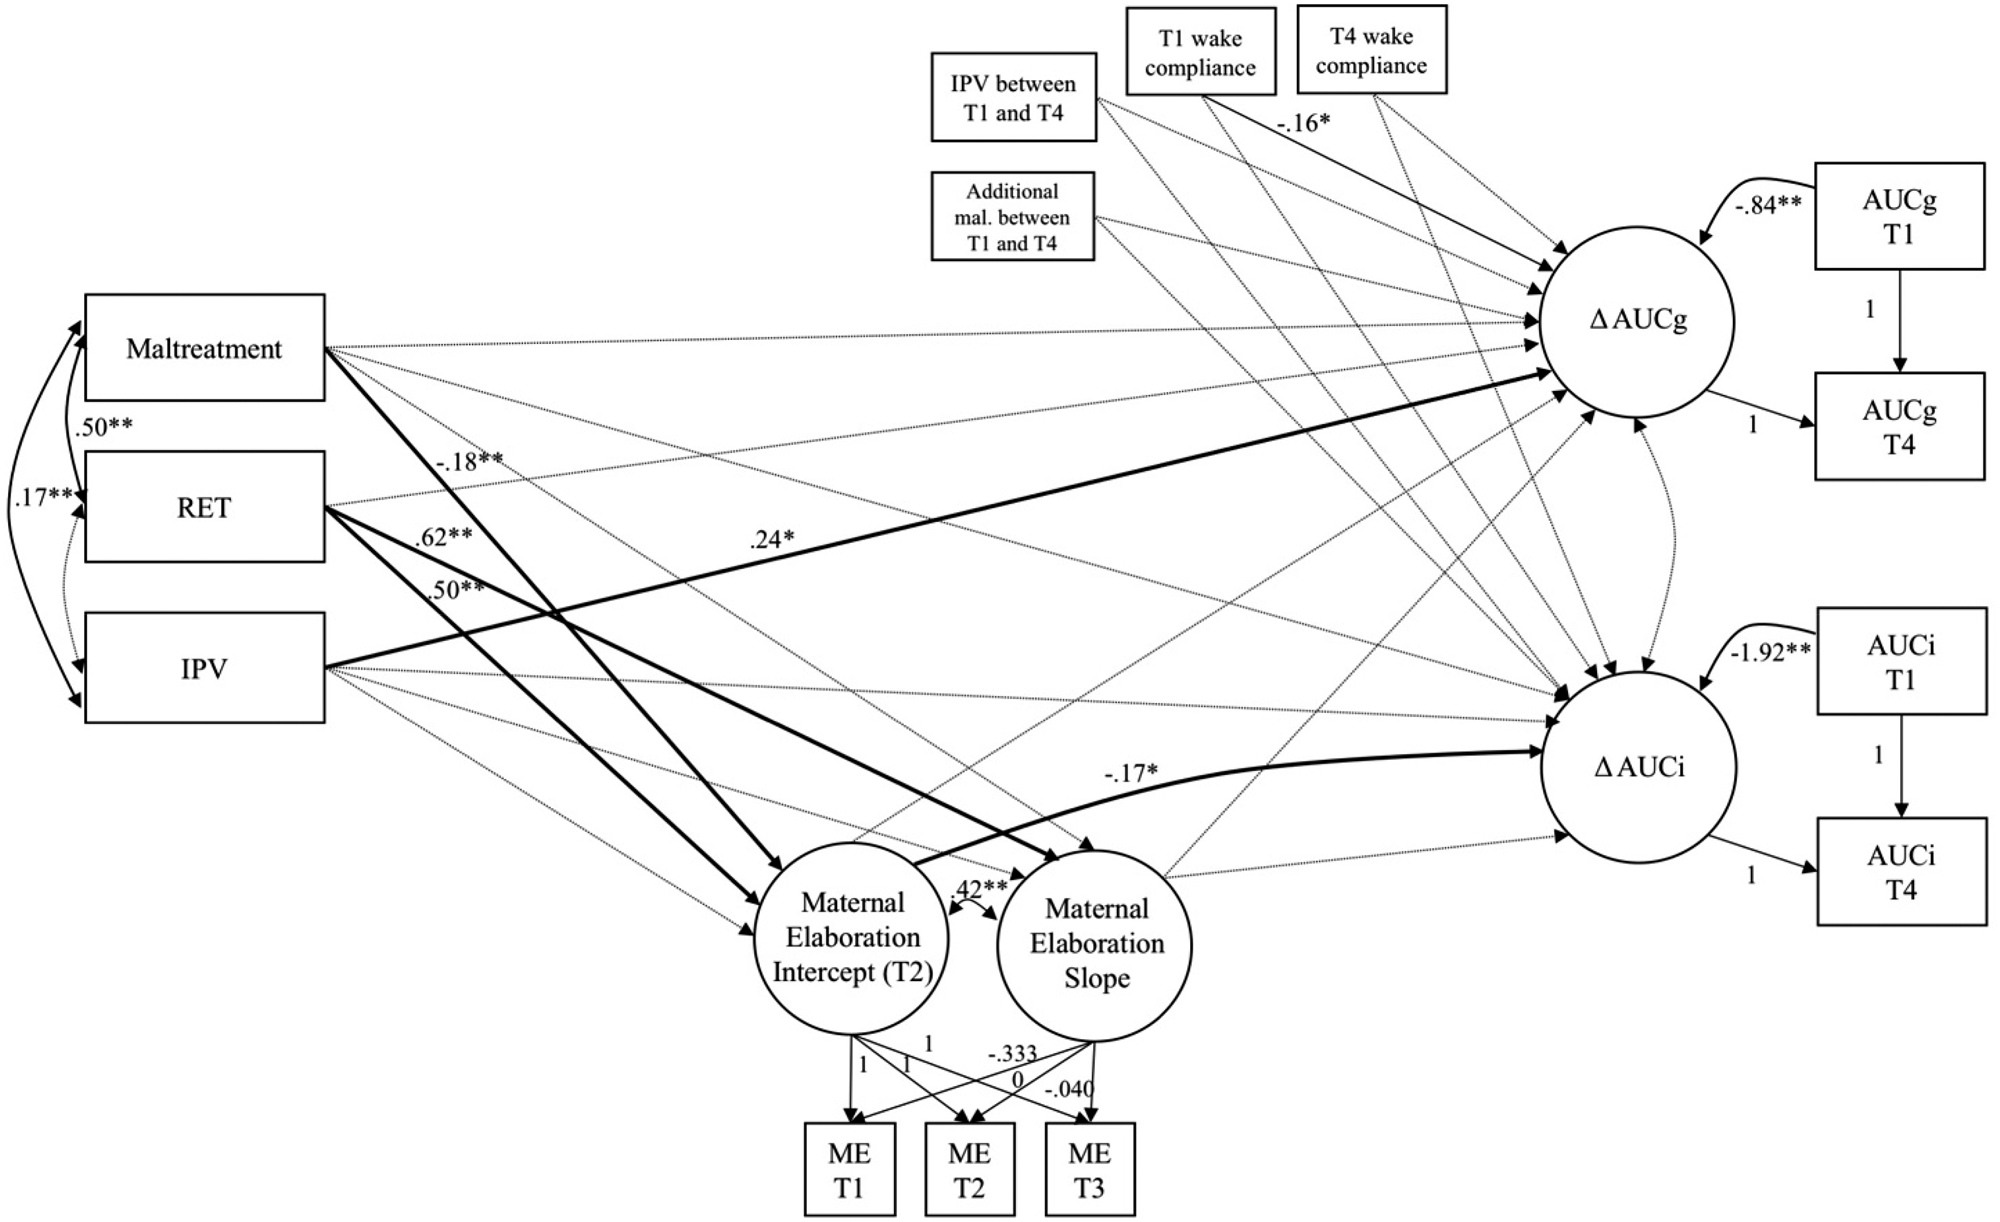 This figure depicts results of the mediation analysis for IPV